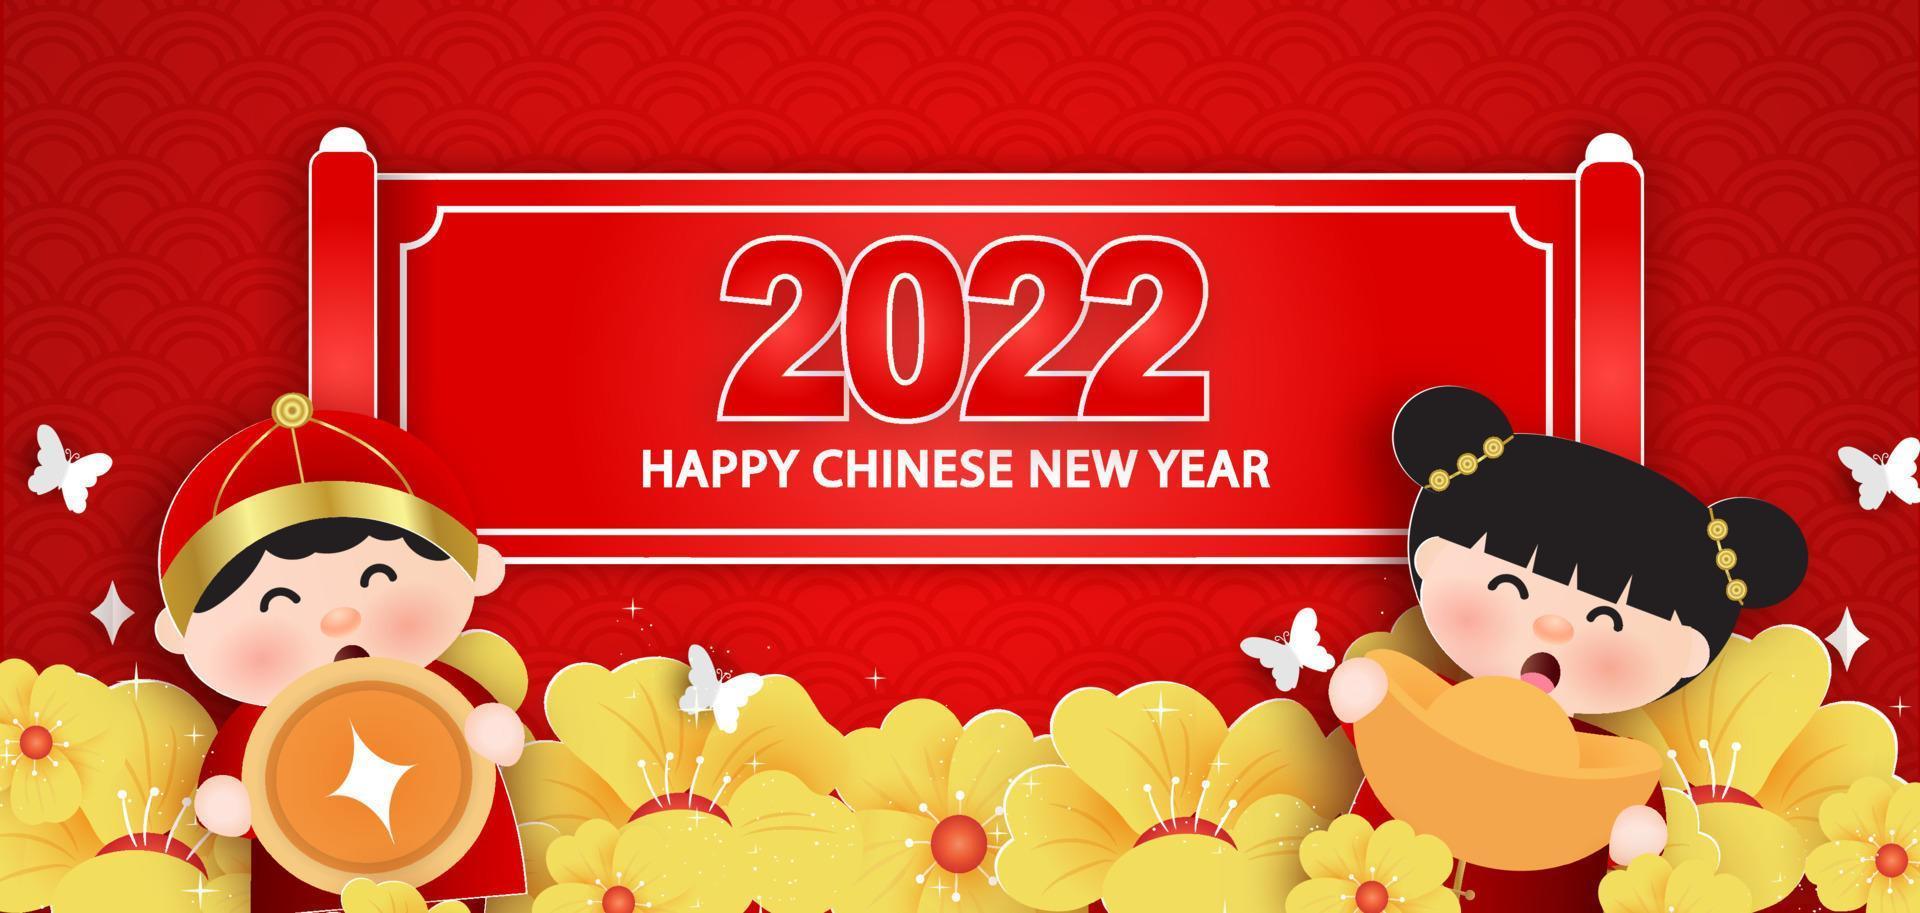 Chinese new year 2022 year of the tiger banner in paper cut style vector